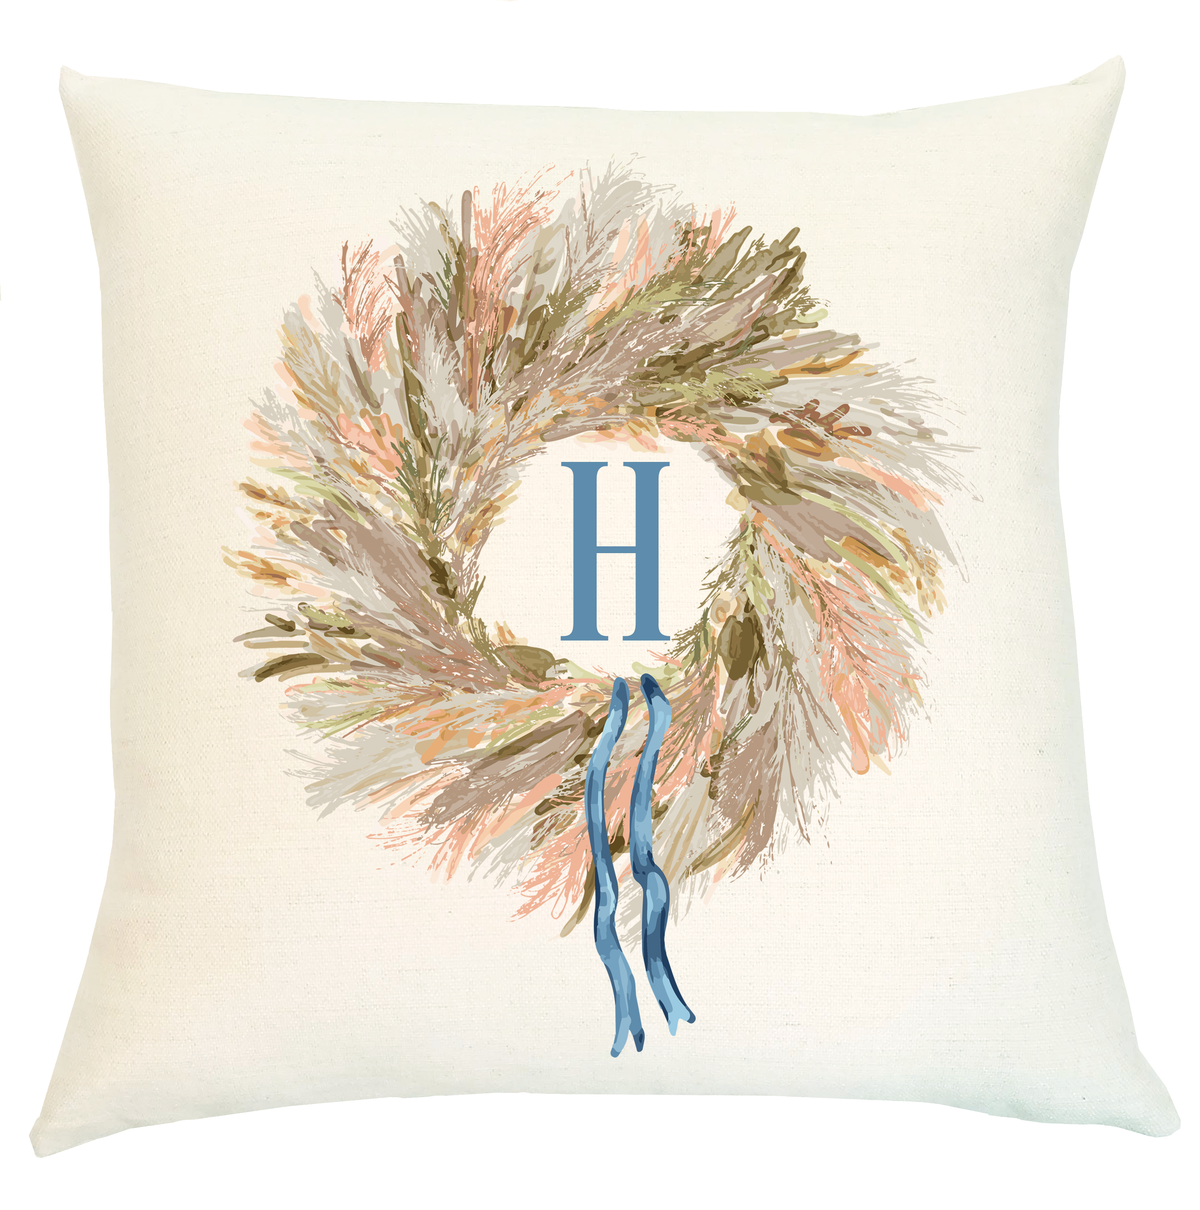 Pillow Personalized - Fall Wreath with Initial